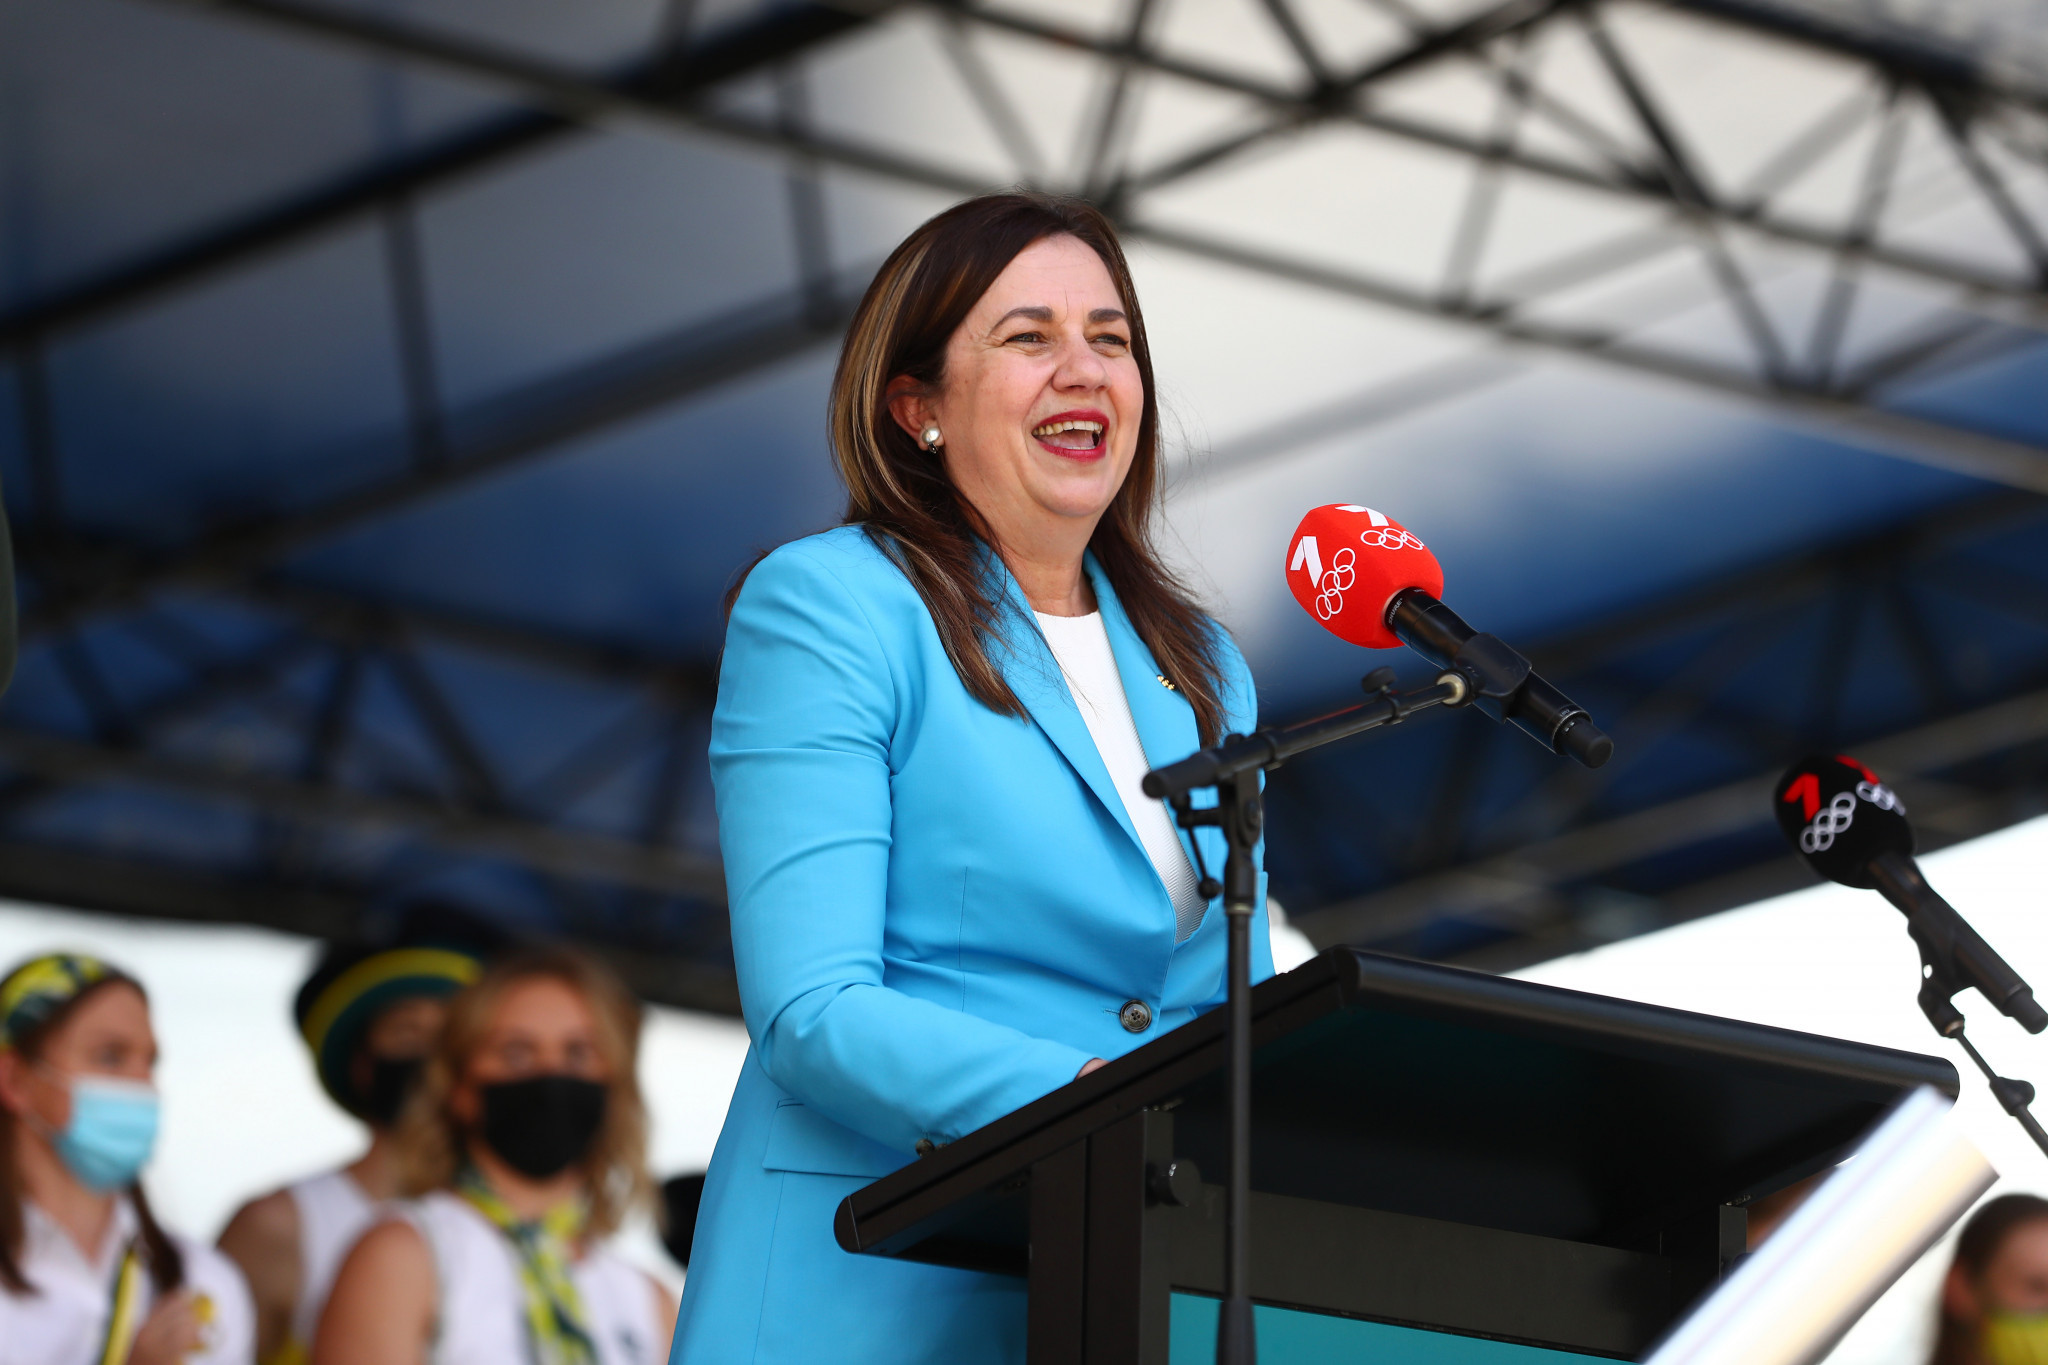 Annastacia Palaszczuk's influence over Brisbane 2032 Organising Committee appointments has been questioned ©Getty Images